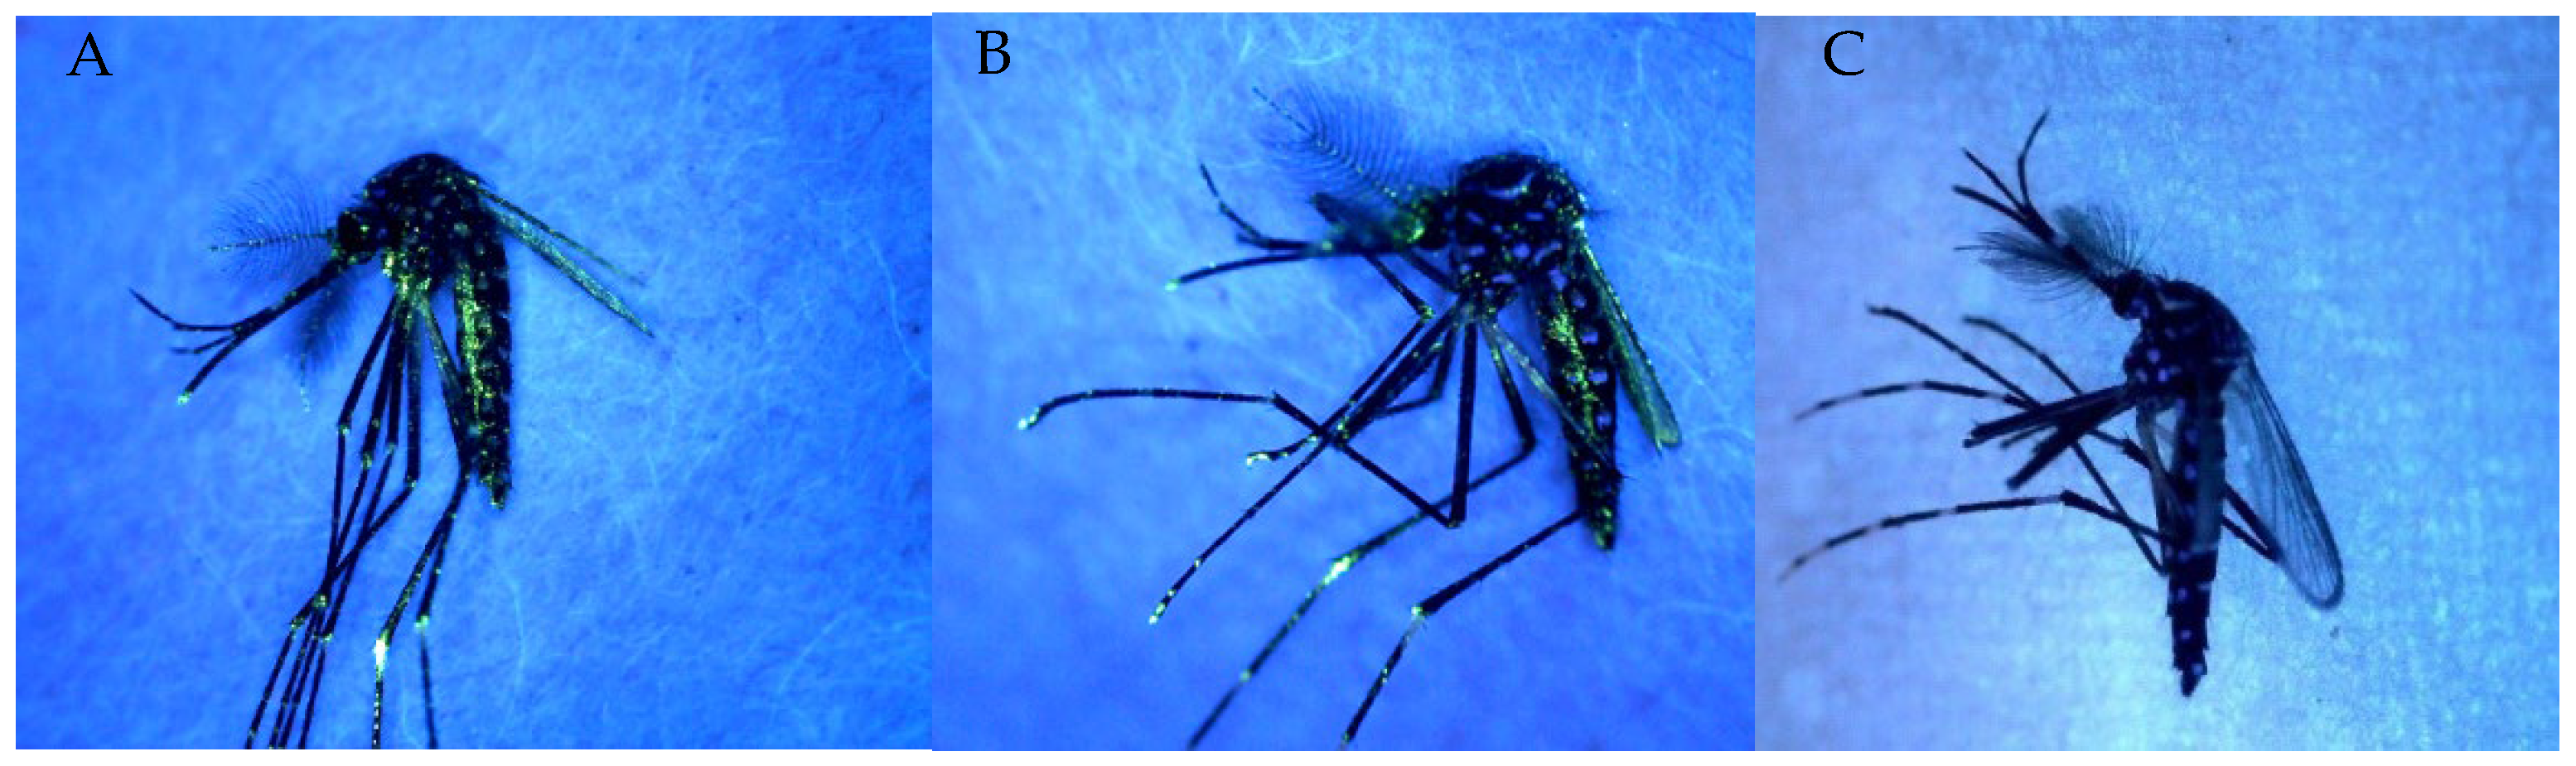 Insects | Free Full-Text | Effectiveness of a New Self-Marking Technique in  Aedes aegypti under Laboratory Conditions | HTML